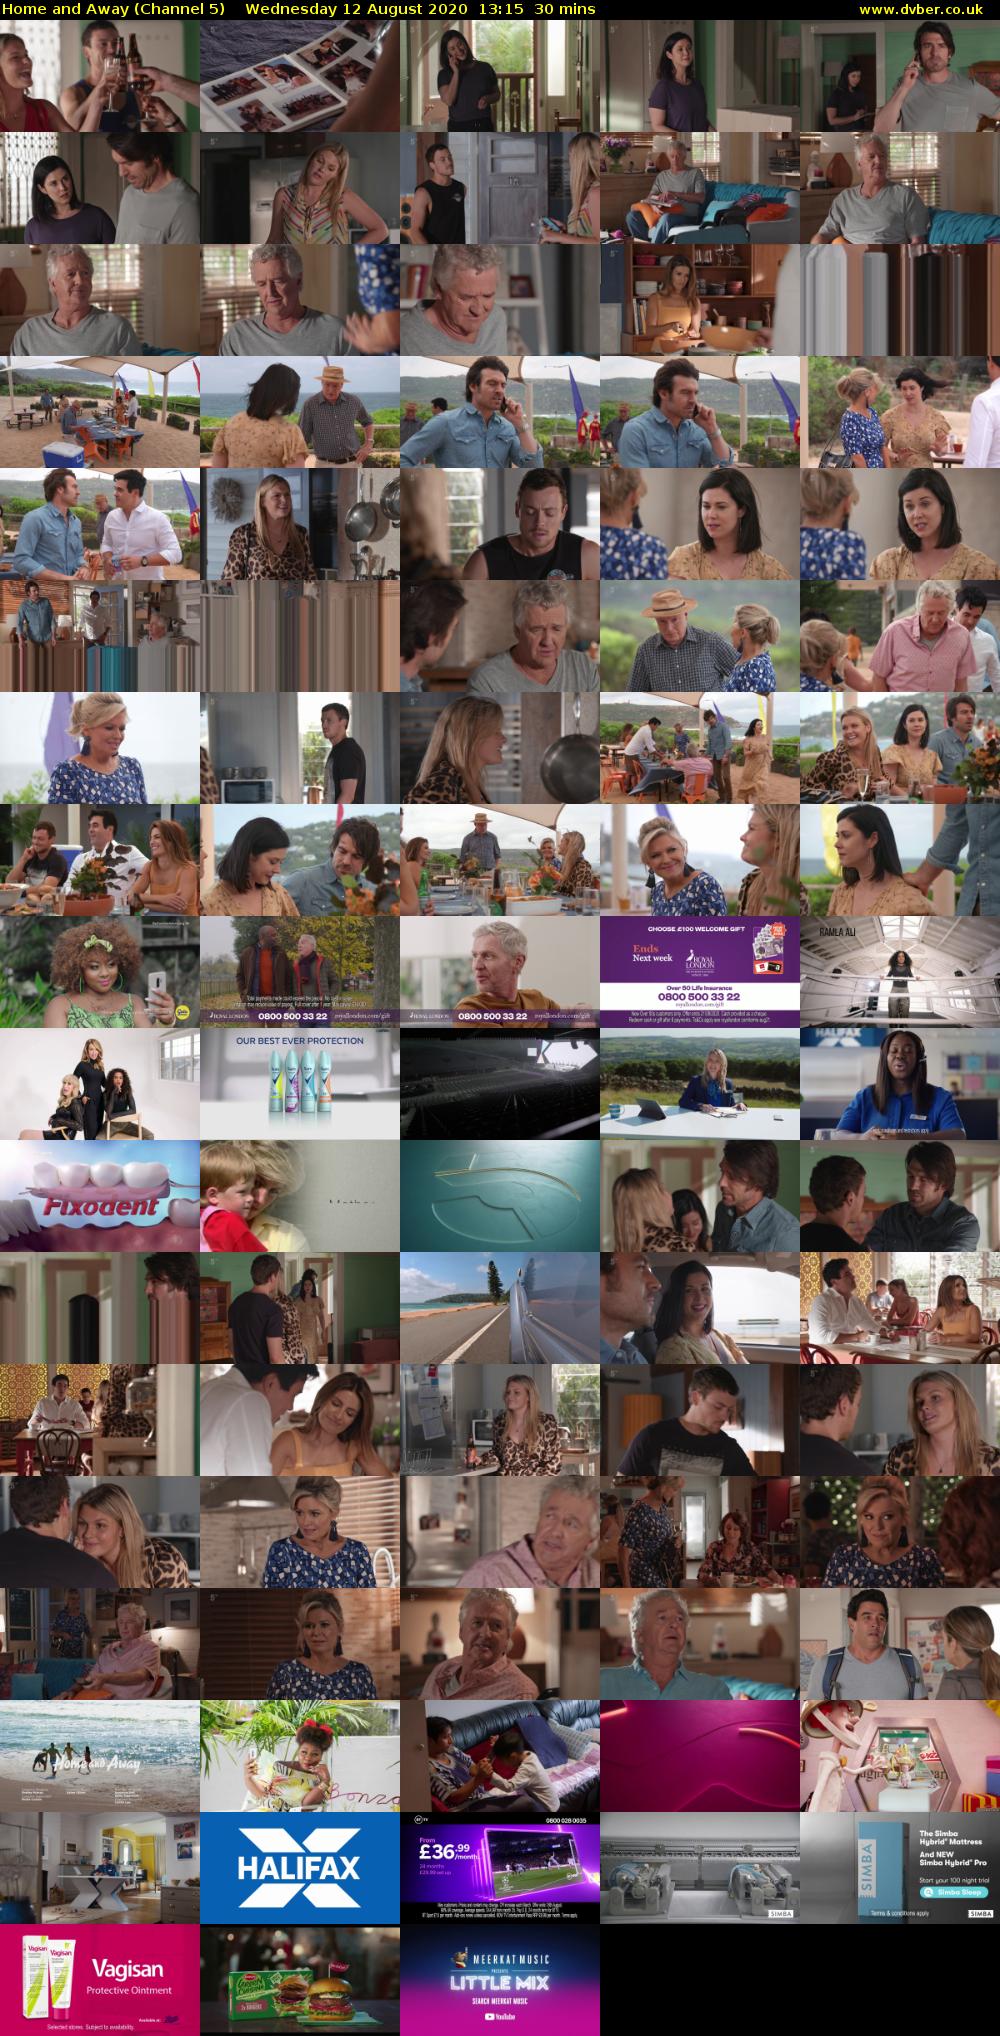 Home and Away (Channel 5) Wednesday 12 August 2020 13:15 - 13:45